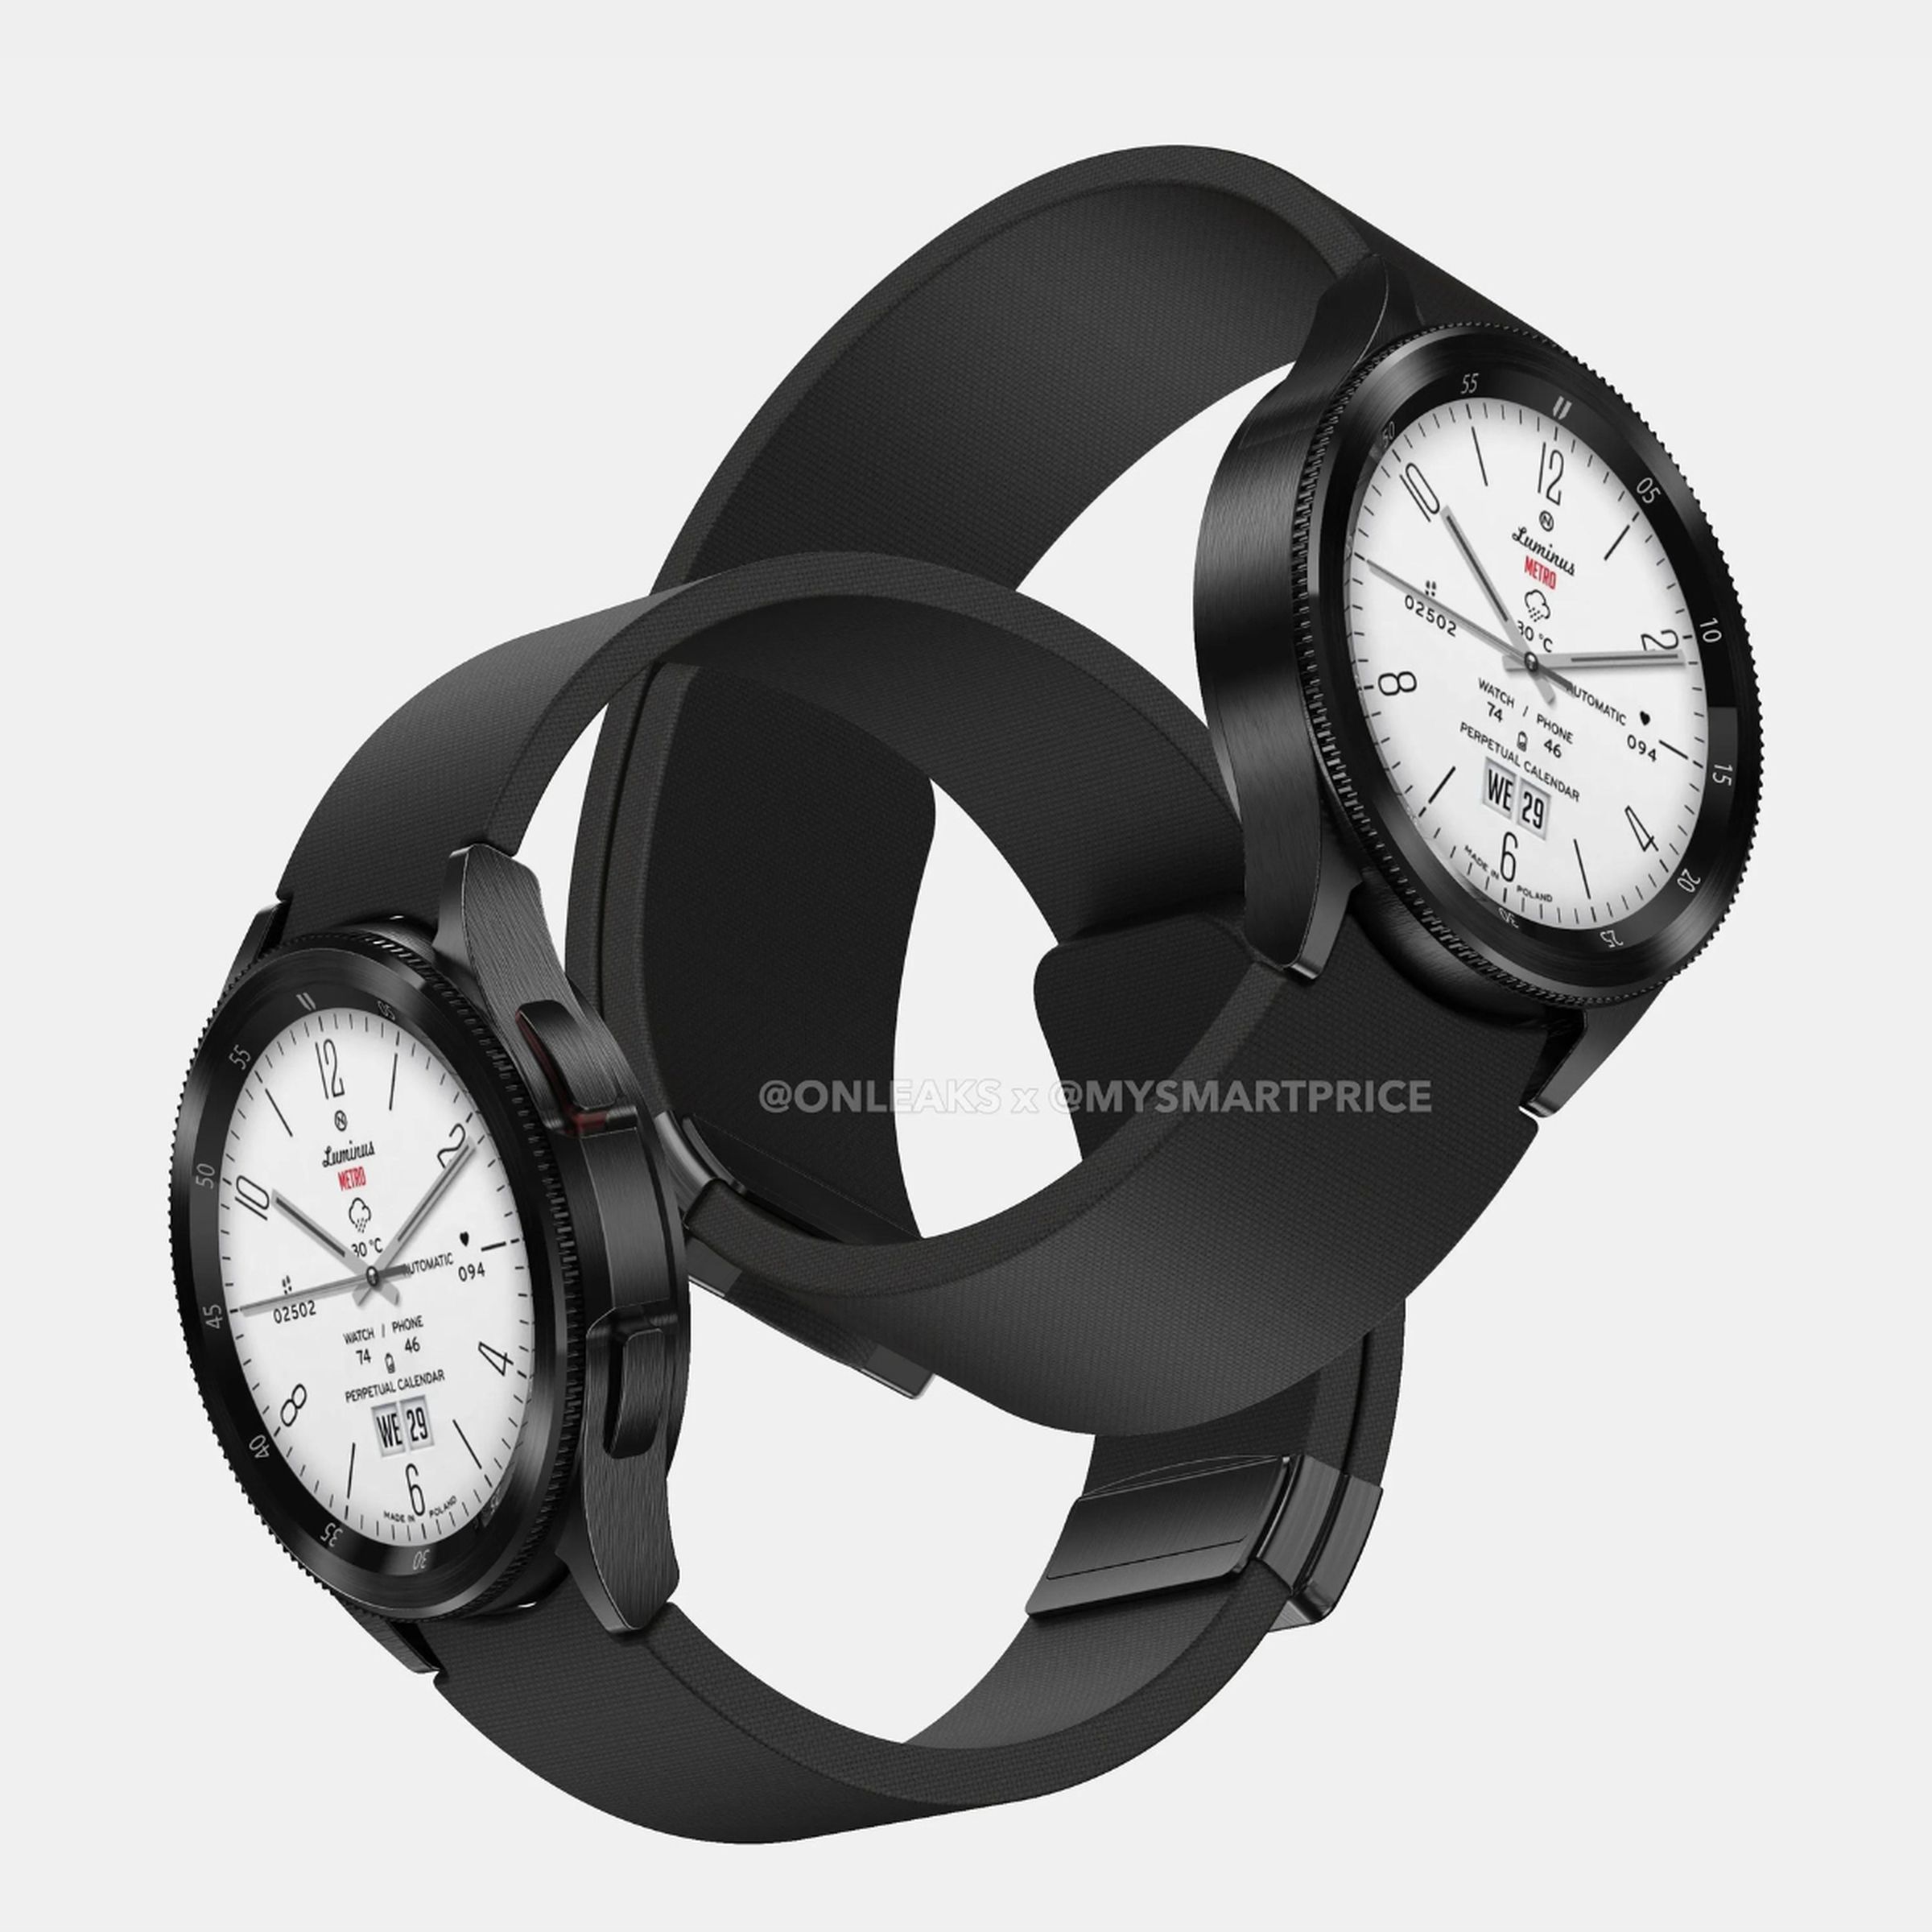 Leaked CAD renders of the Samsung Galaxy Watch 6 Classic.